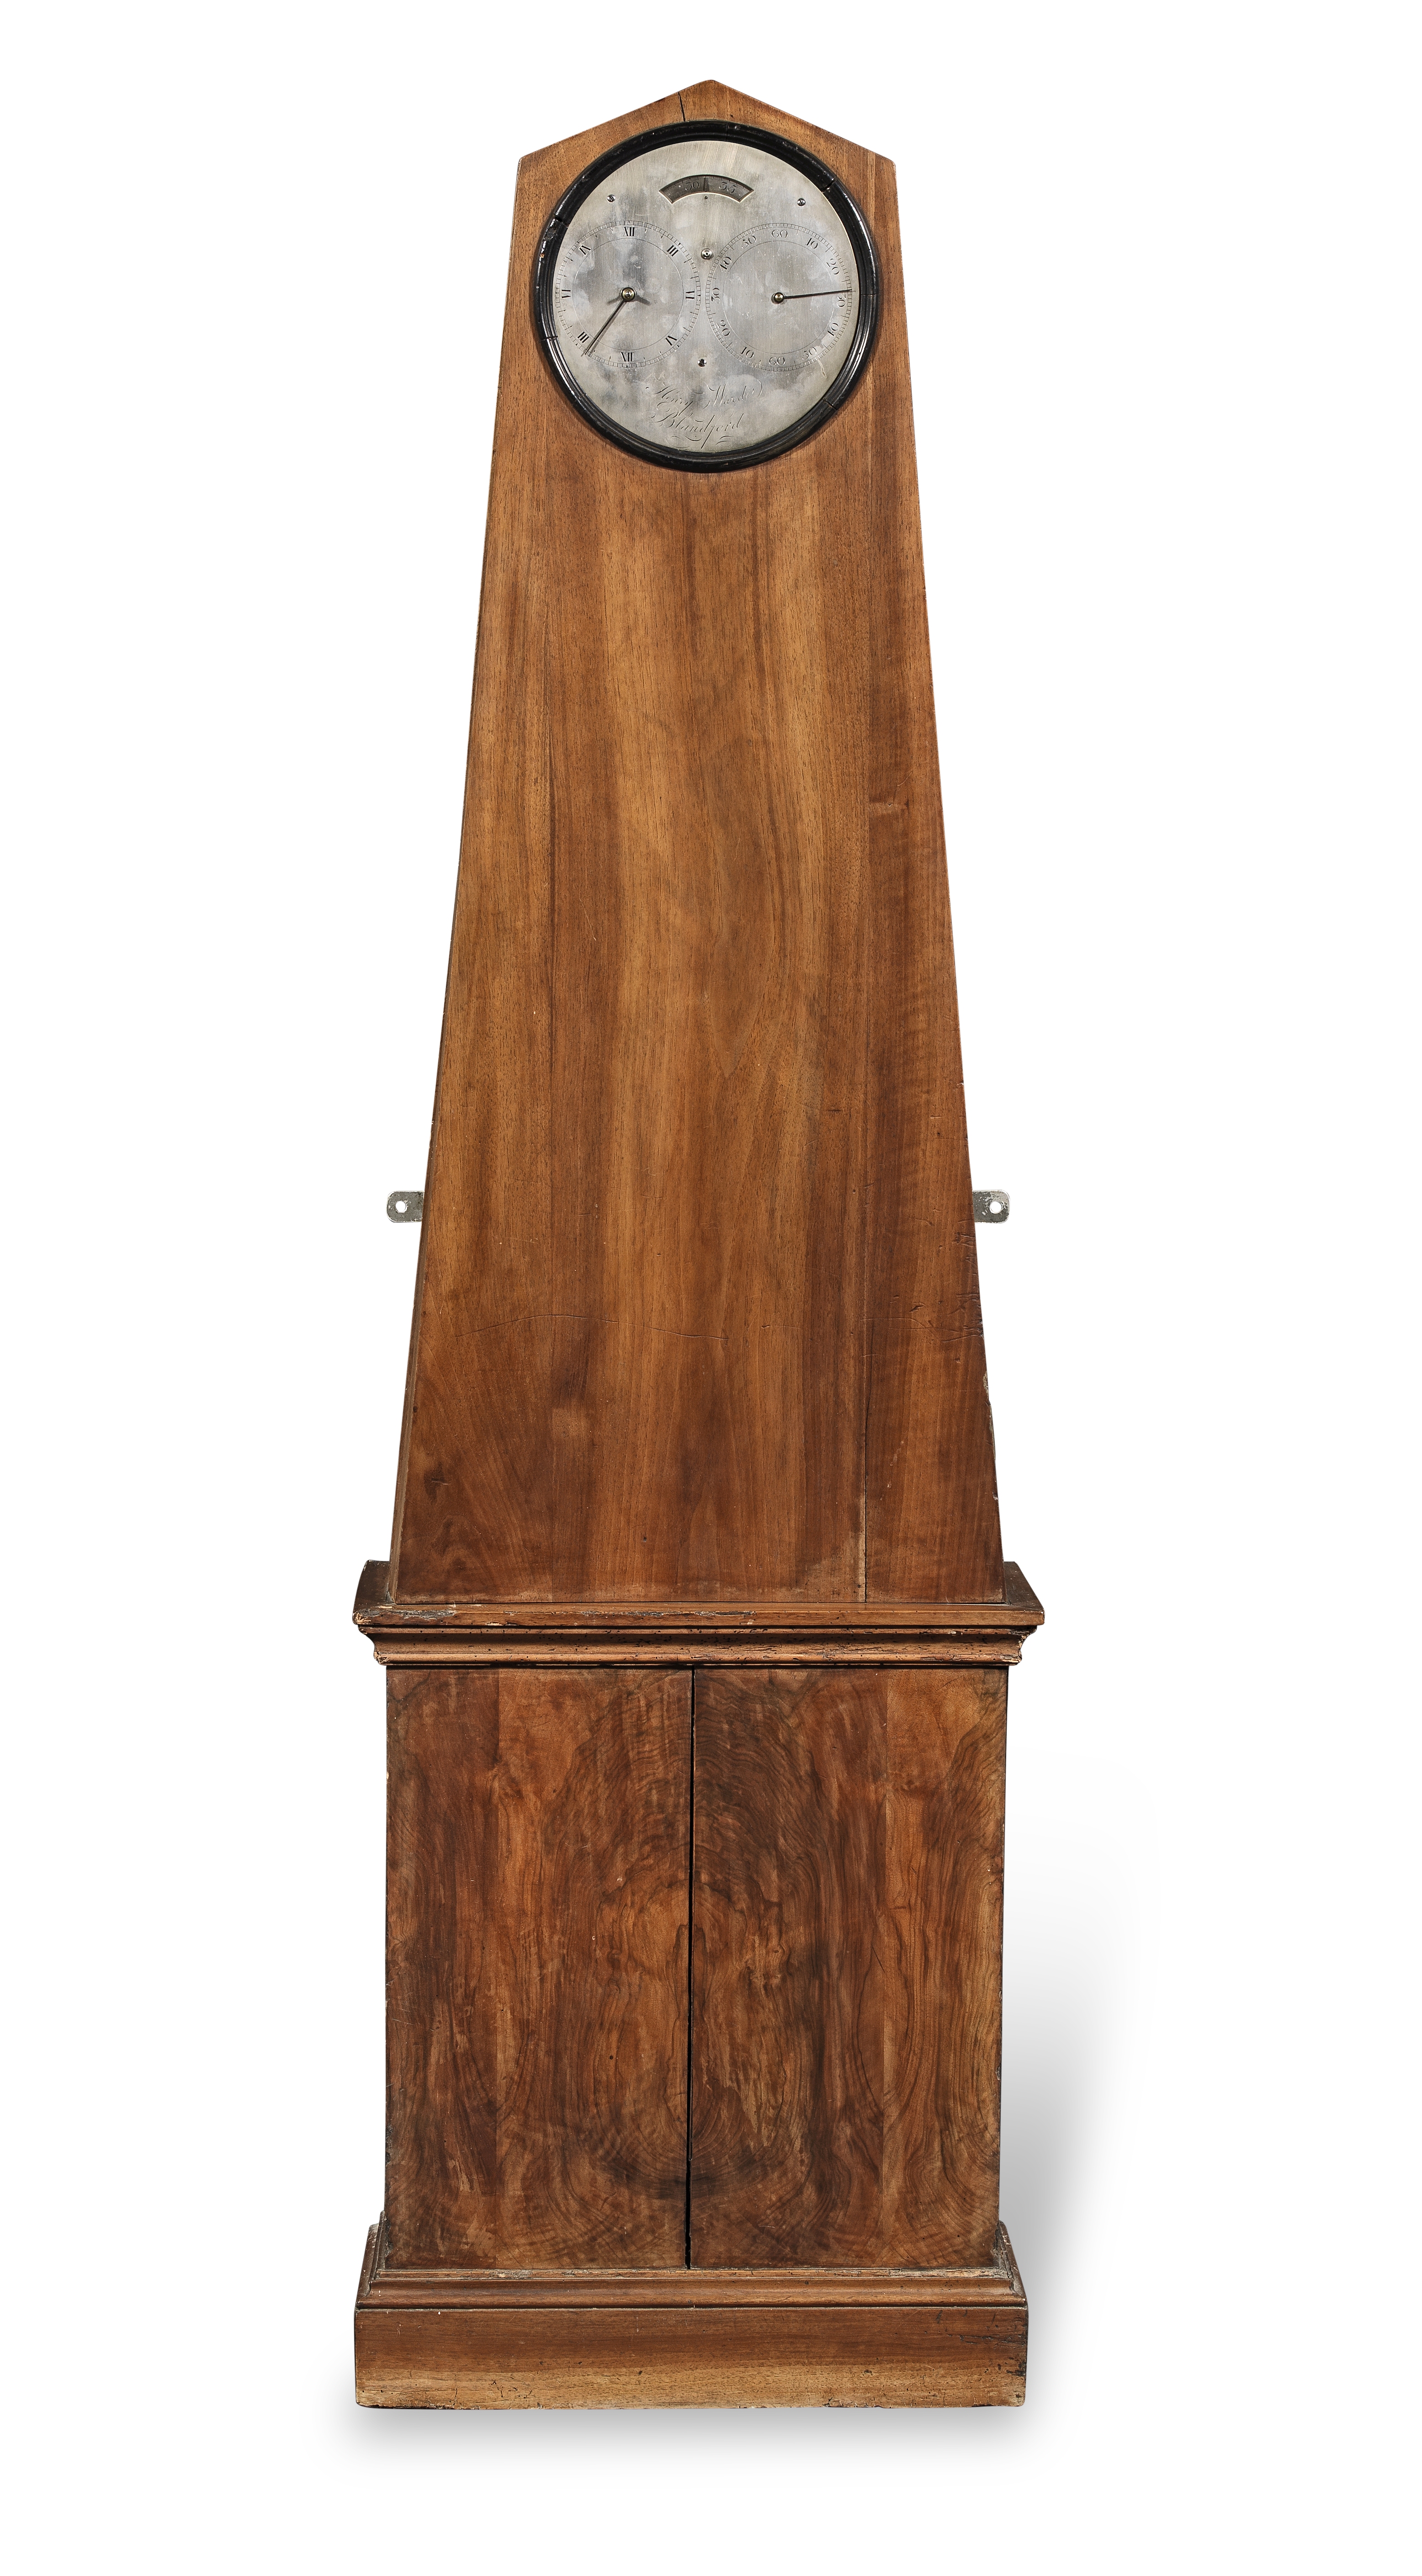 An extremely rare late 18th century weight driven walnut-cased floor standing regulator Henry Wa...